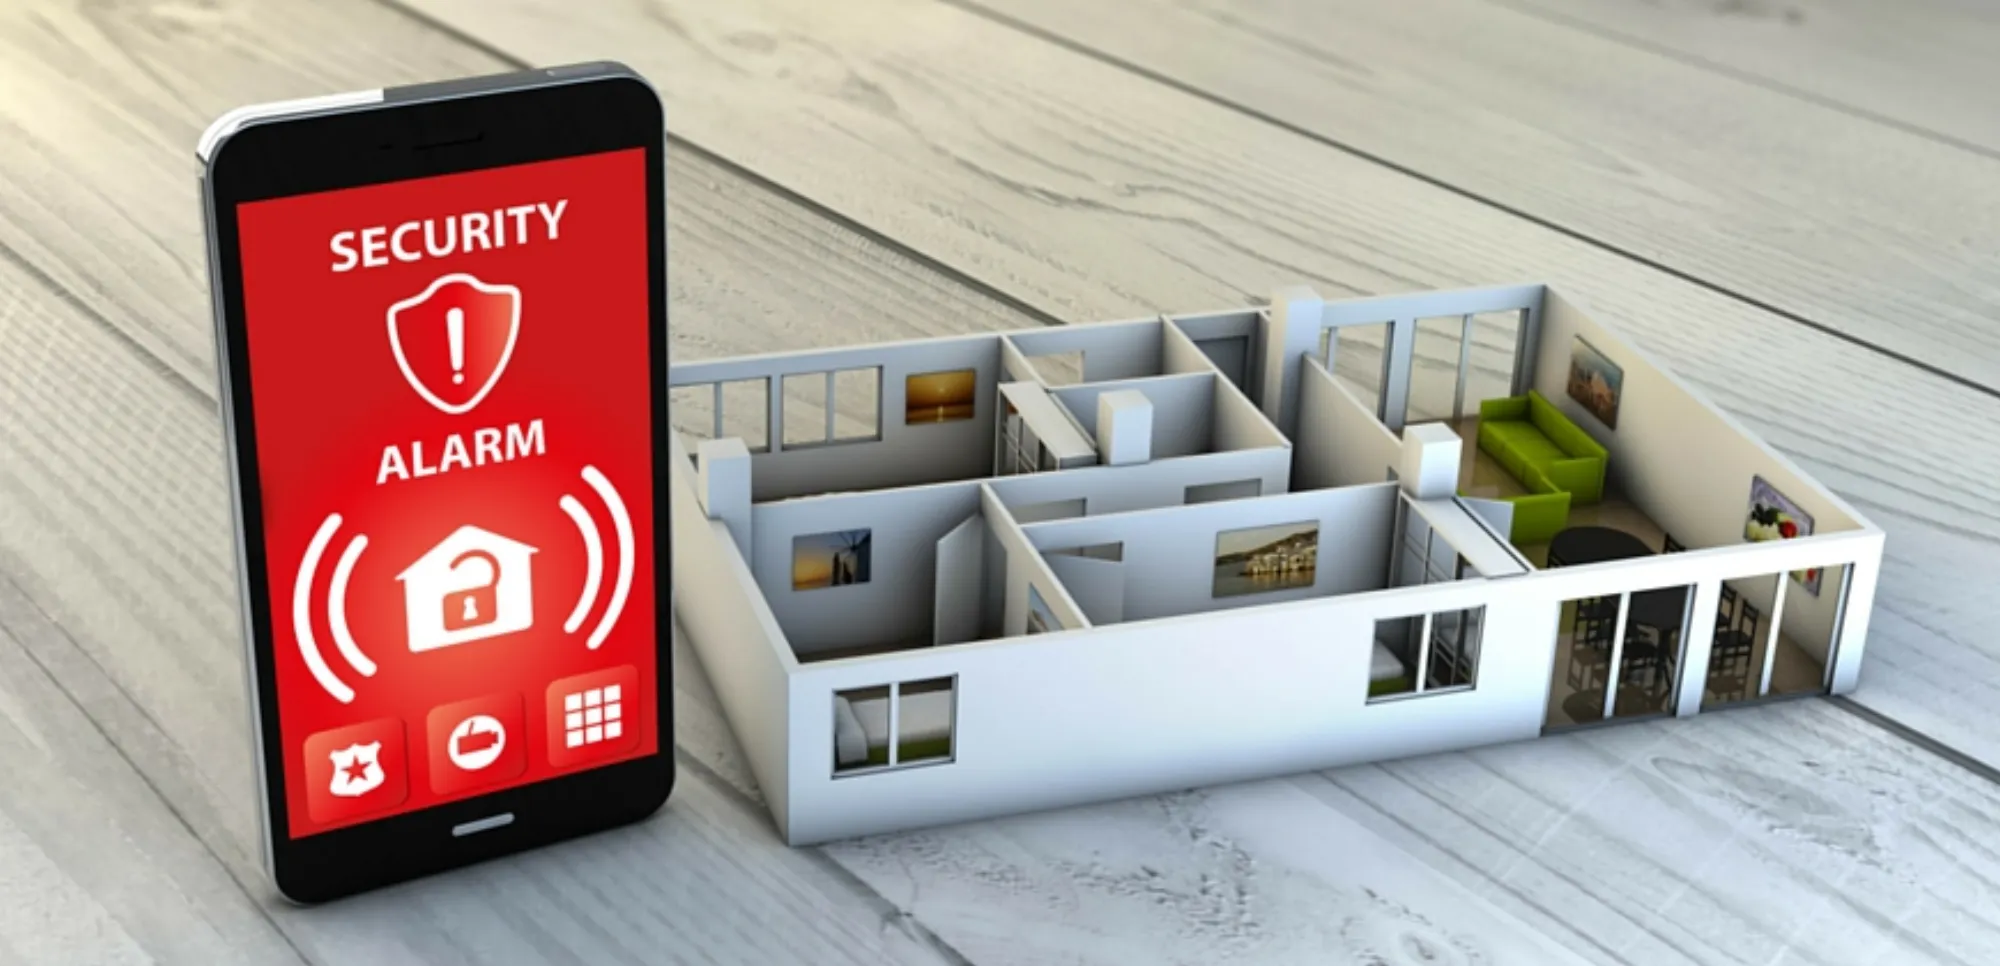 24 Hour Security Alarm Monitoring Services by Nelson Bays Security